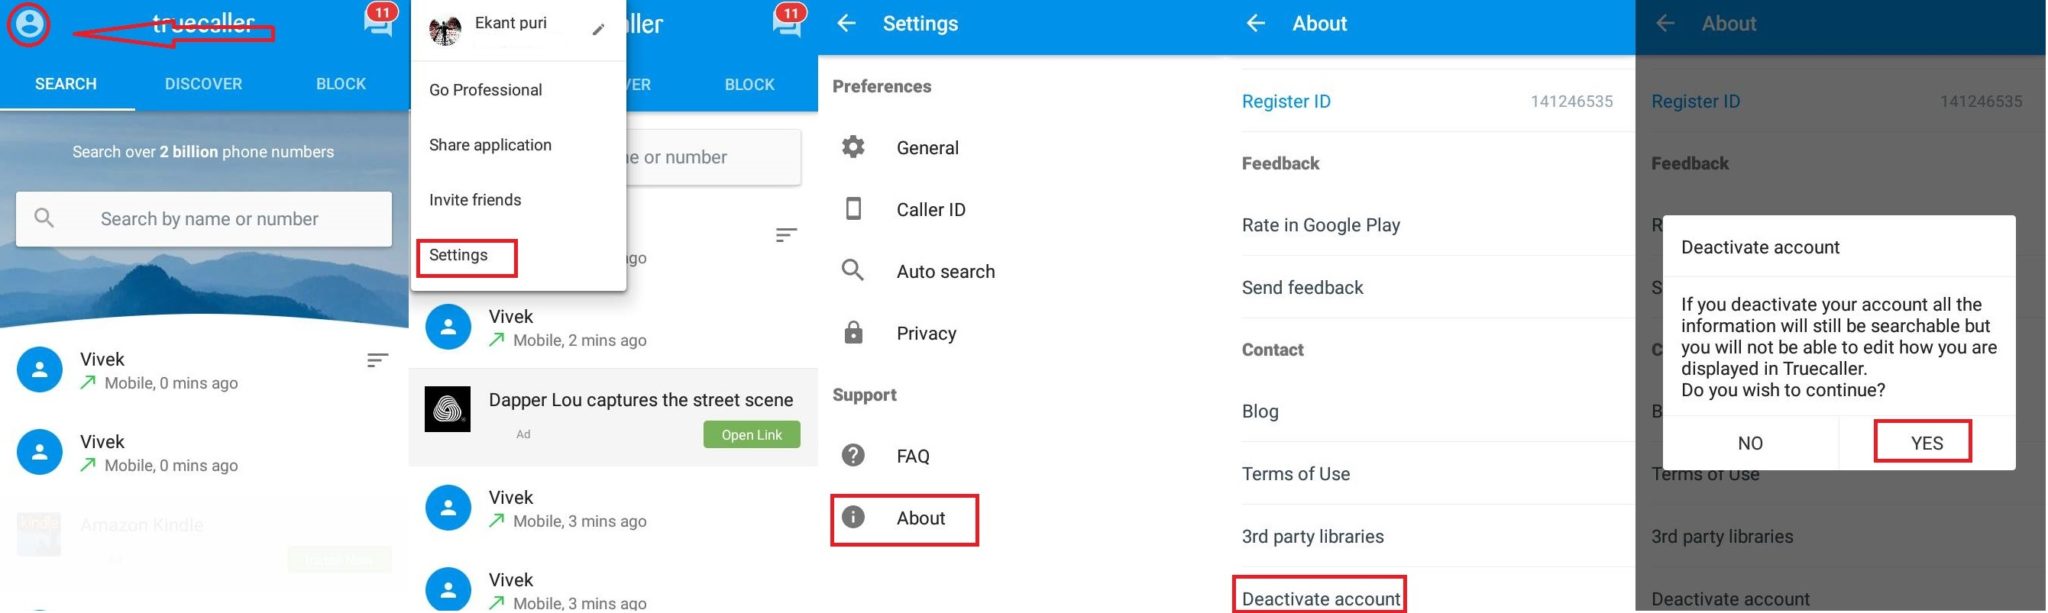 How to Deactivate your Truecaller account to Remove your Number From Truecaller